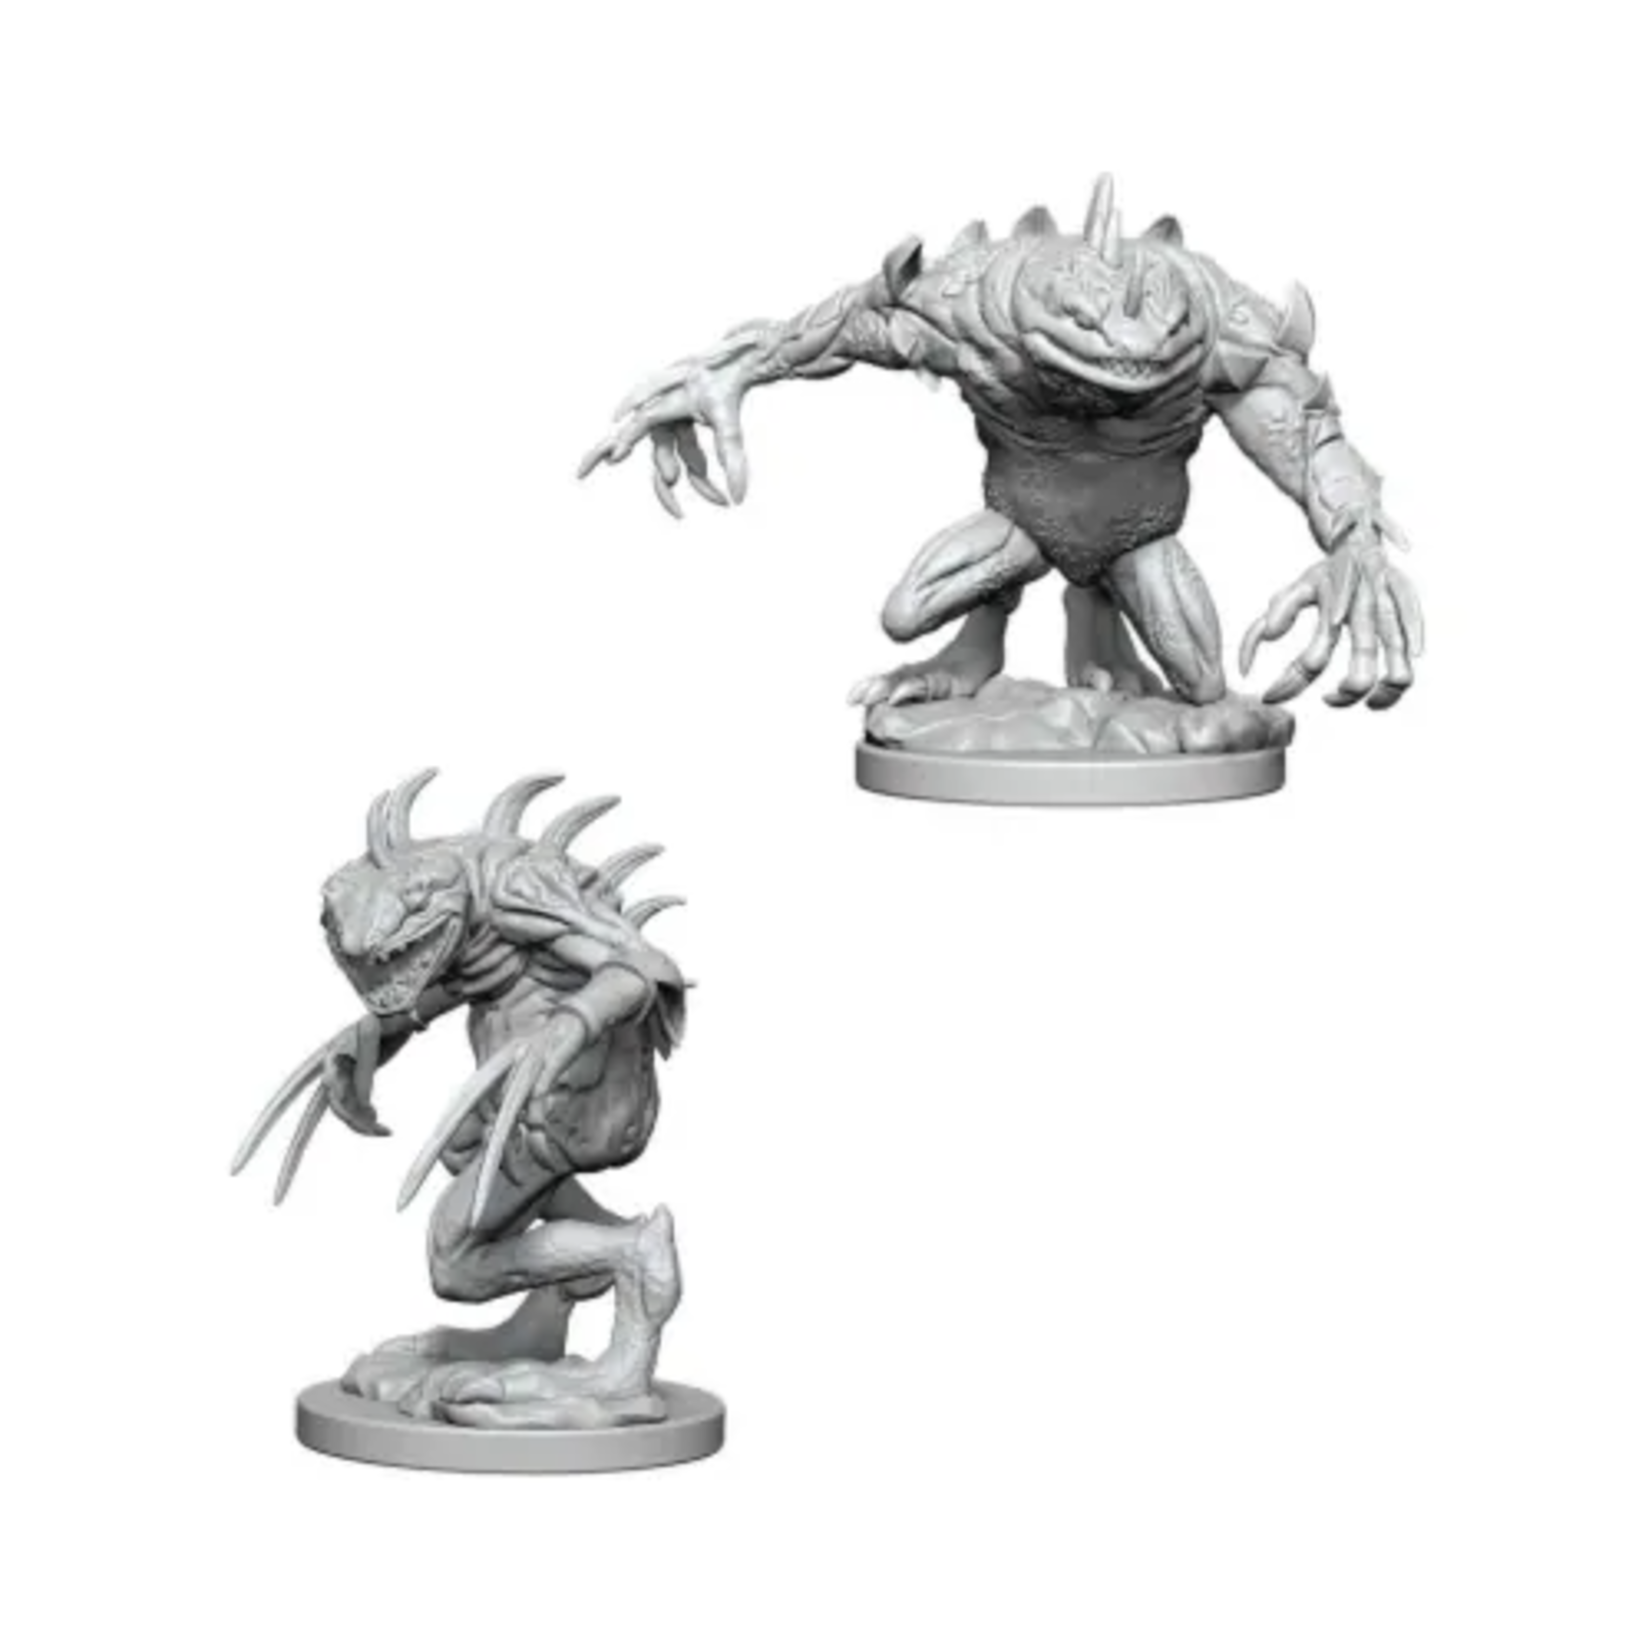 WizKids Dungeons and Dragons Nolzur's Marvelous Minis Gray Slaad and Death Slaad